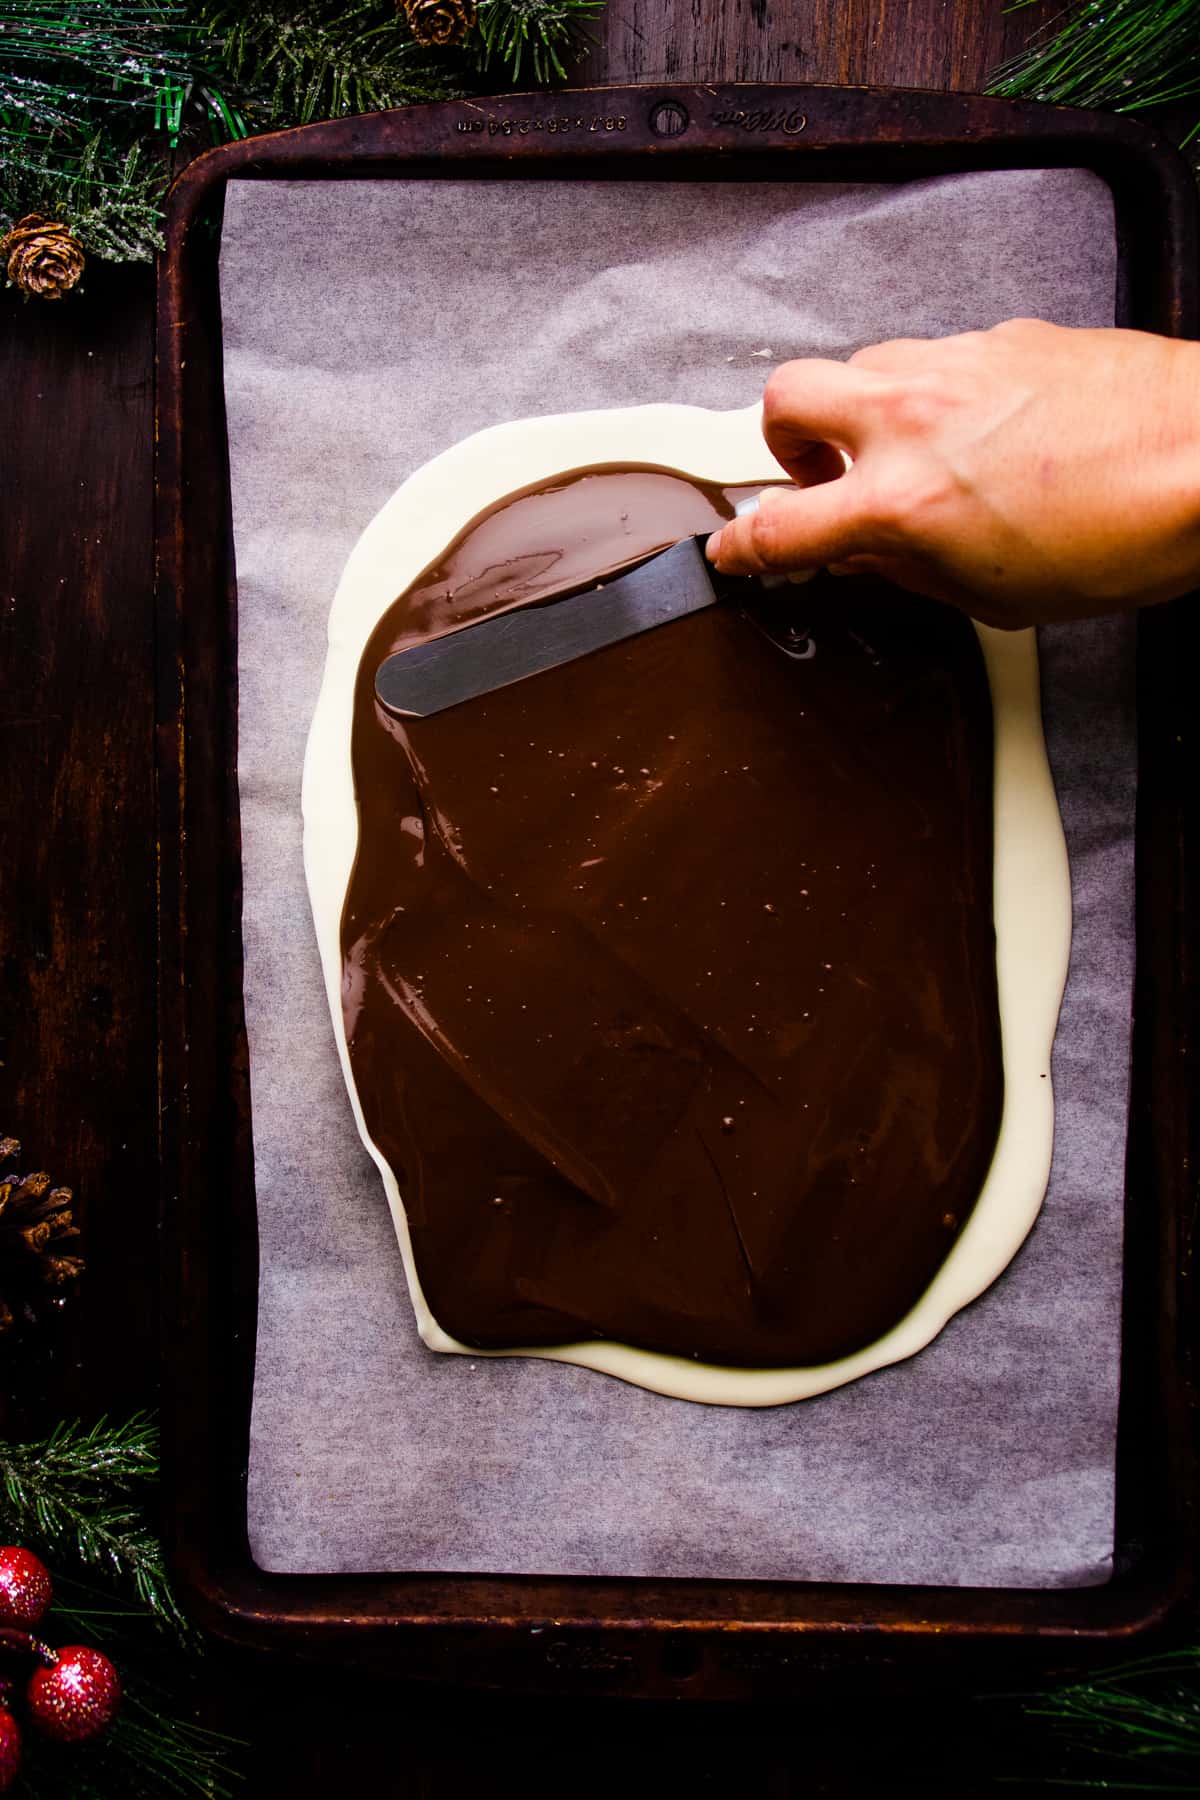 A person is spreading melted chocolate on a baking sheet.